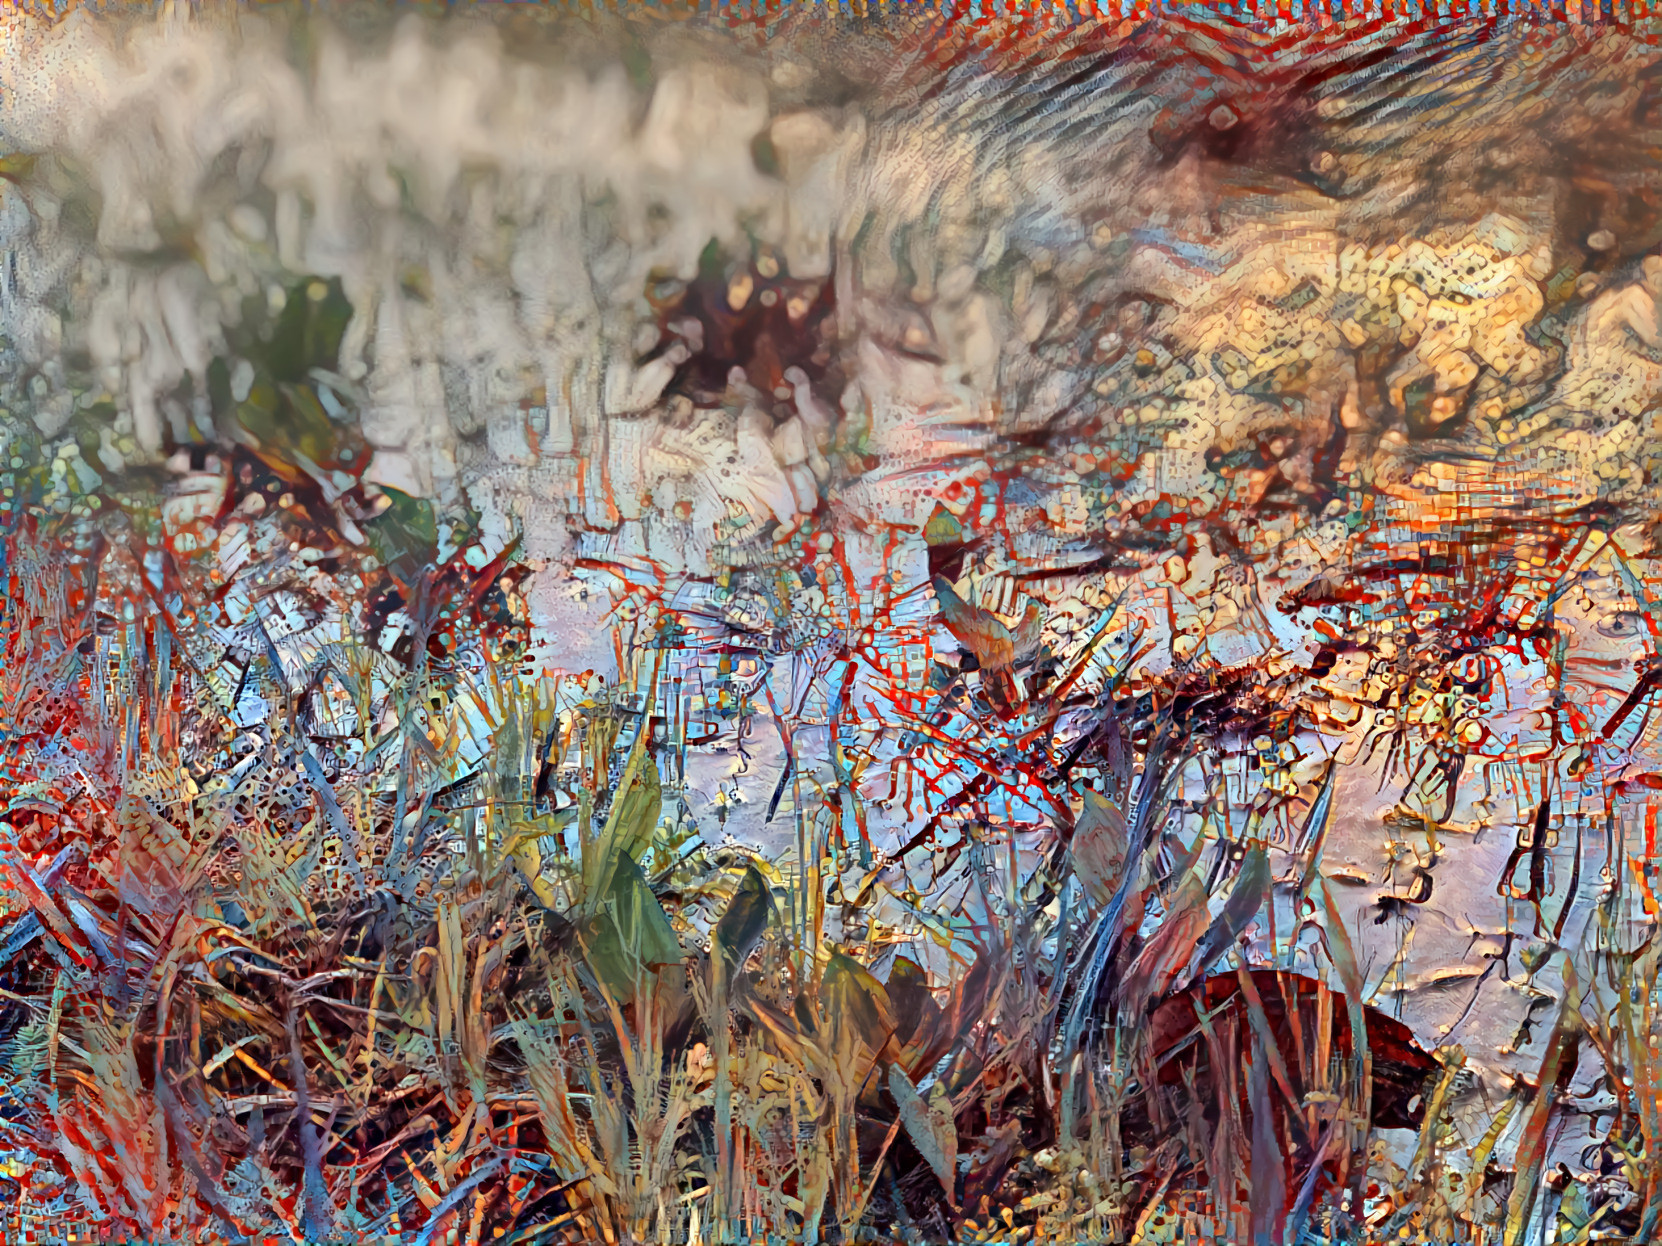 Manic marsh with muted hues